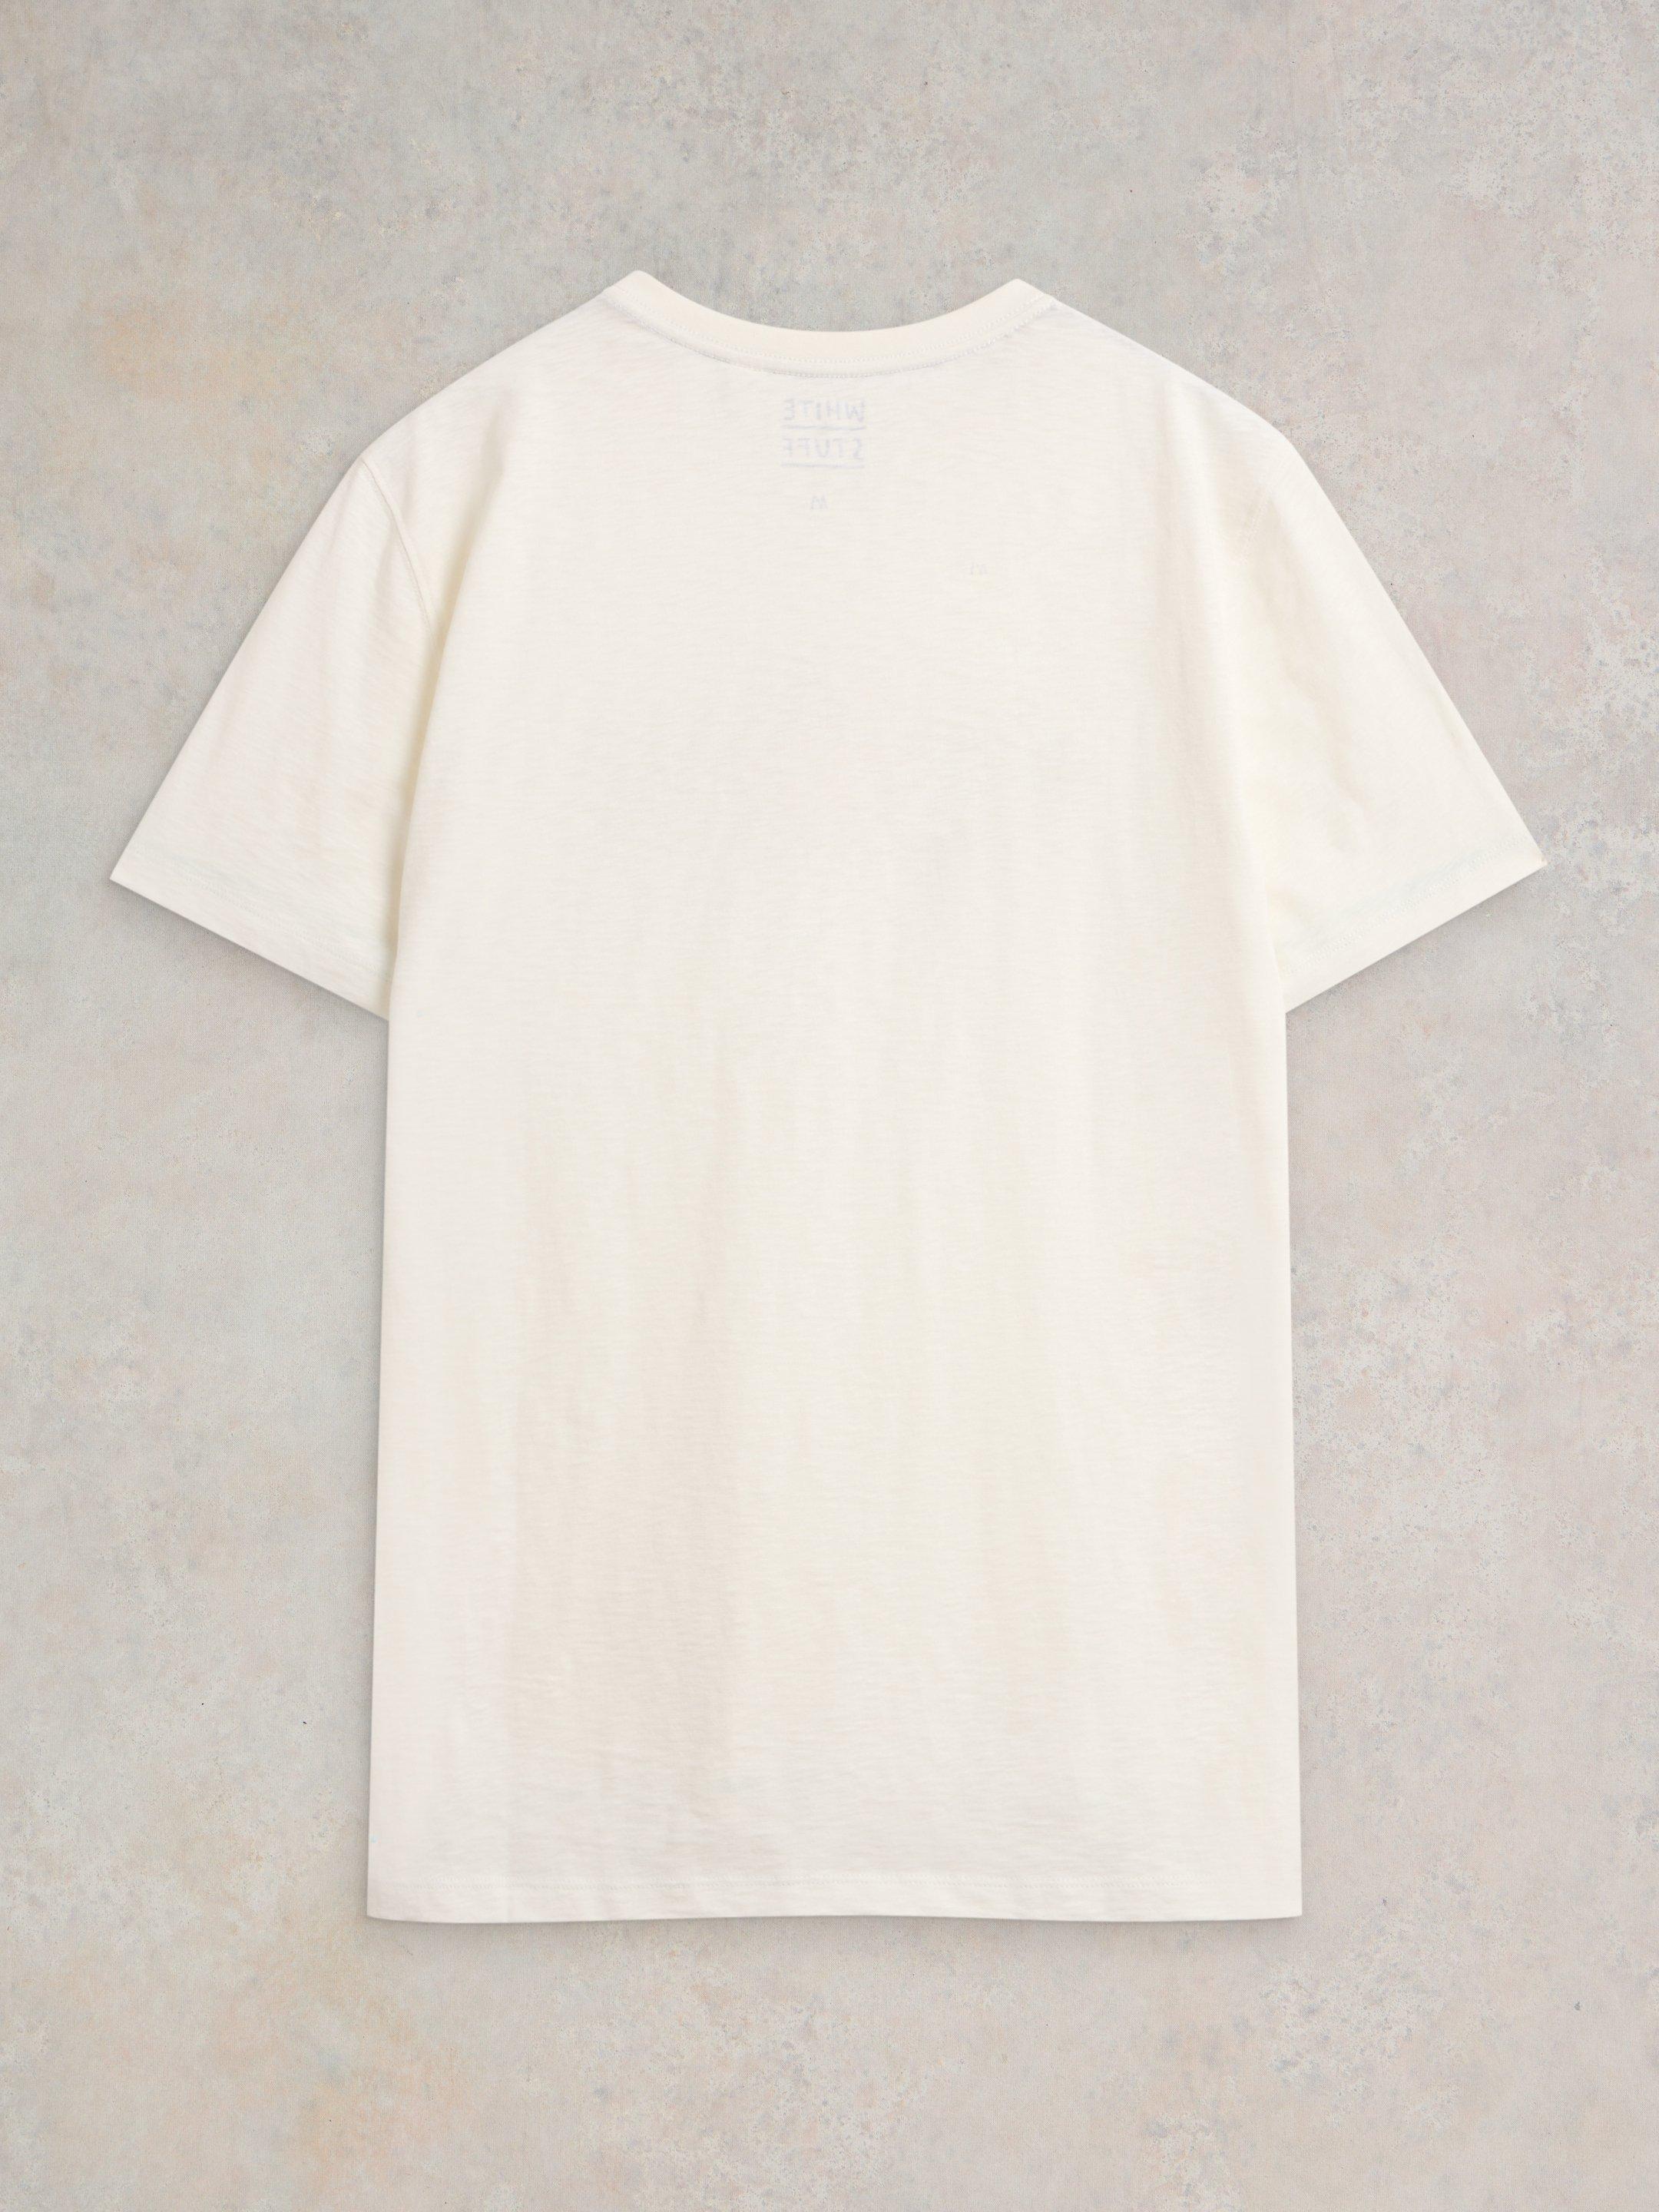 Out of Offish Graphic Tee in WHITE PR - FLAT BACK